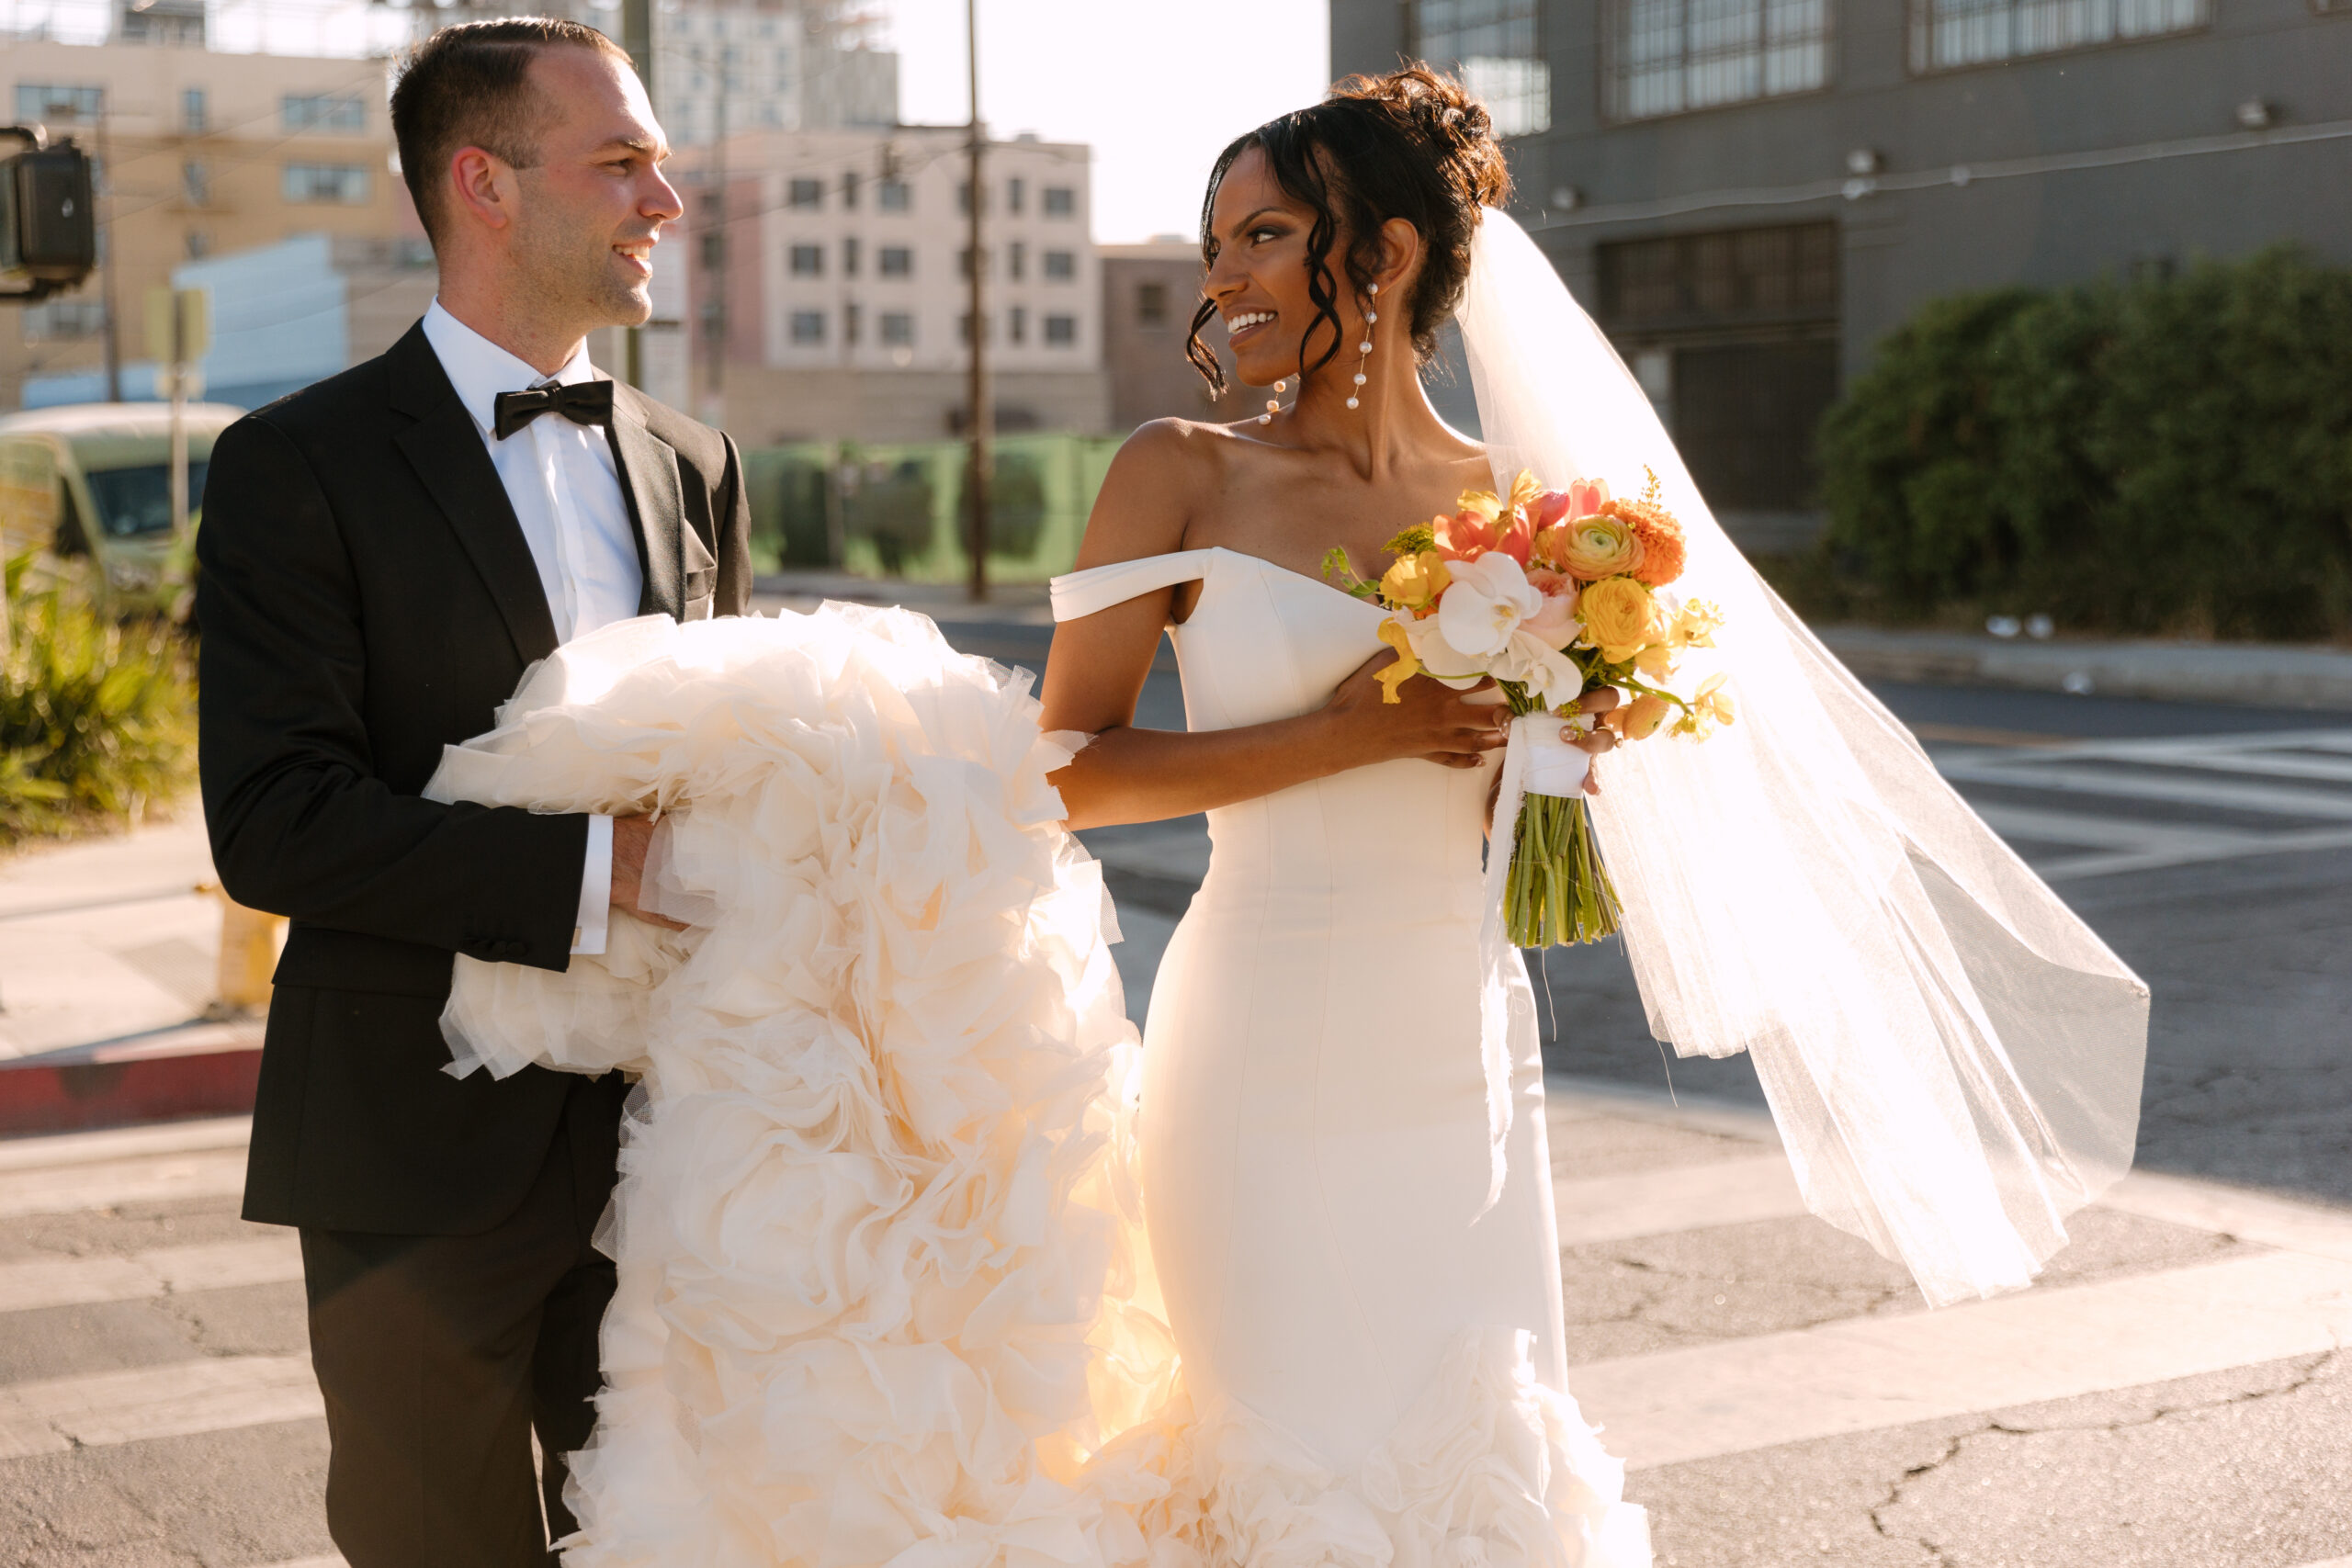 photo of white groom holding Black bride's train as they walk through a crosswalk in DTLA smiling at each other